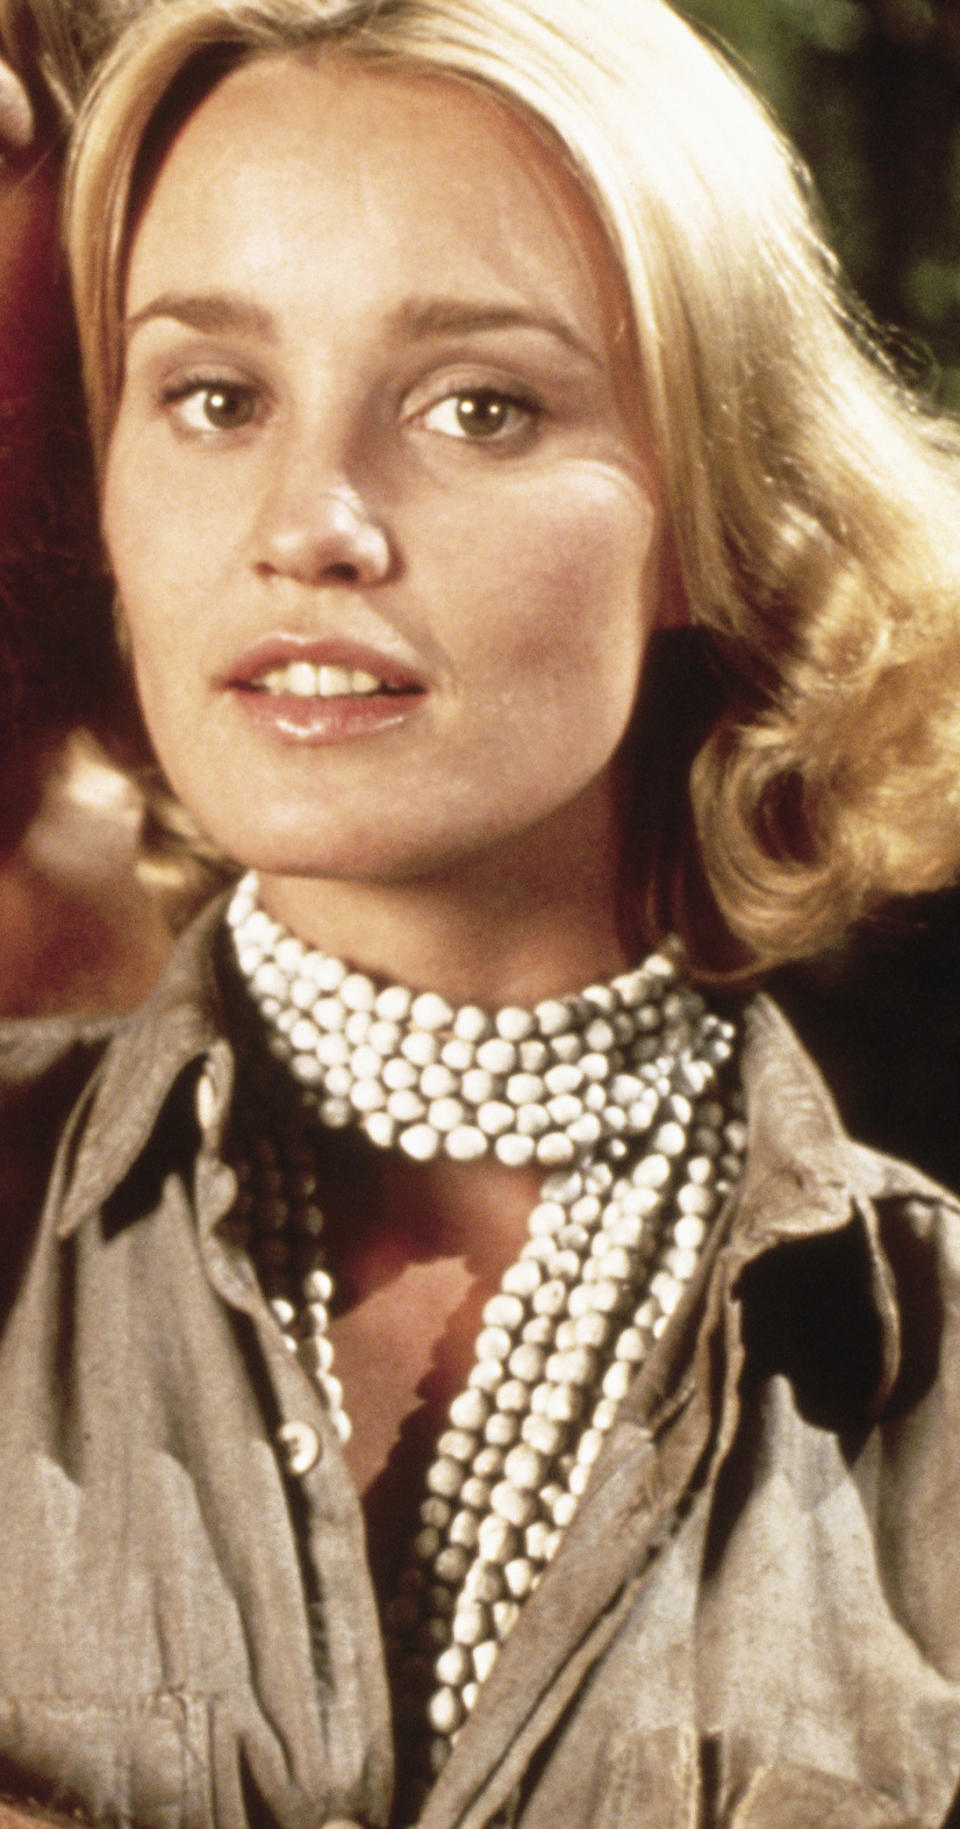 Jessica Lange with short curly hair while wearing long pearls